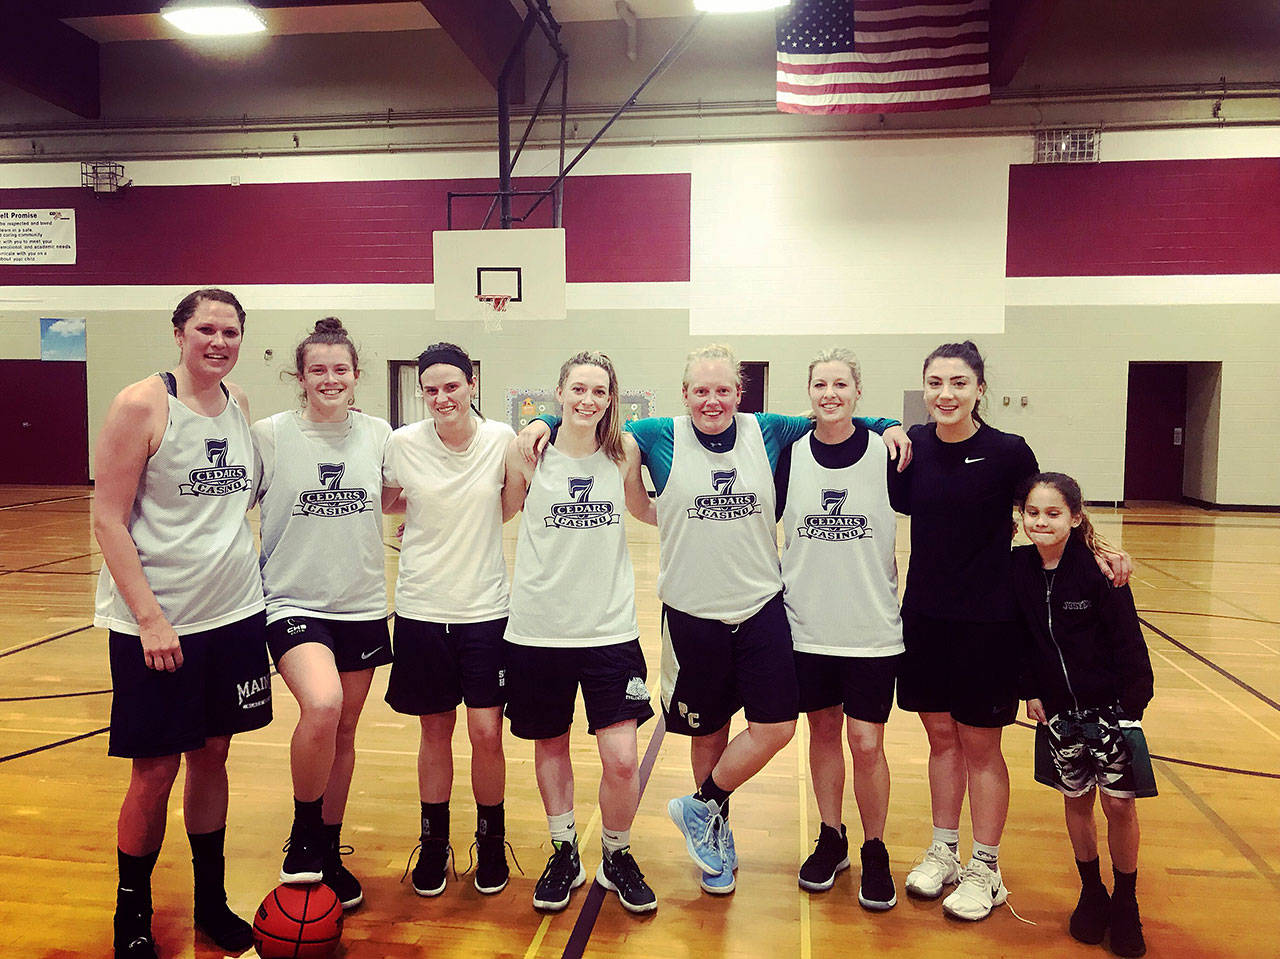 Members of the winning squad from 7 Cedars Casino celebrate a win in the Port Angeles Parks & Recreation women’s basketball league on May 15. After splitting the first two of the best-of-three series, 7 Cedars Casino routed Elwha 80-58 in the decisive third game. Submitted photo